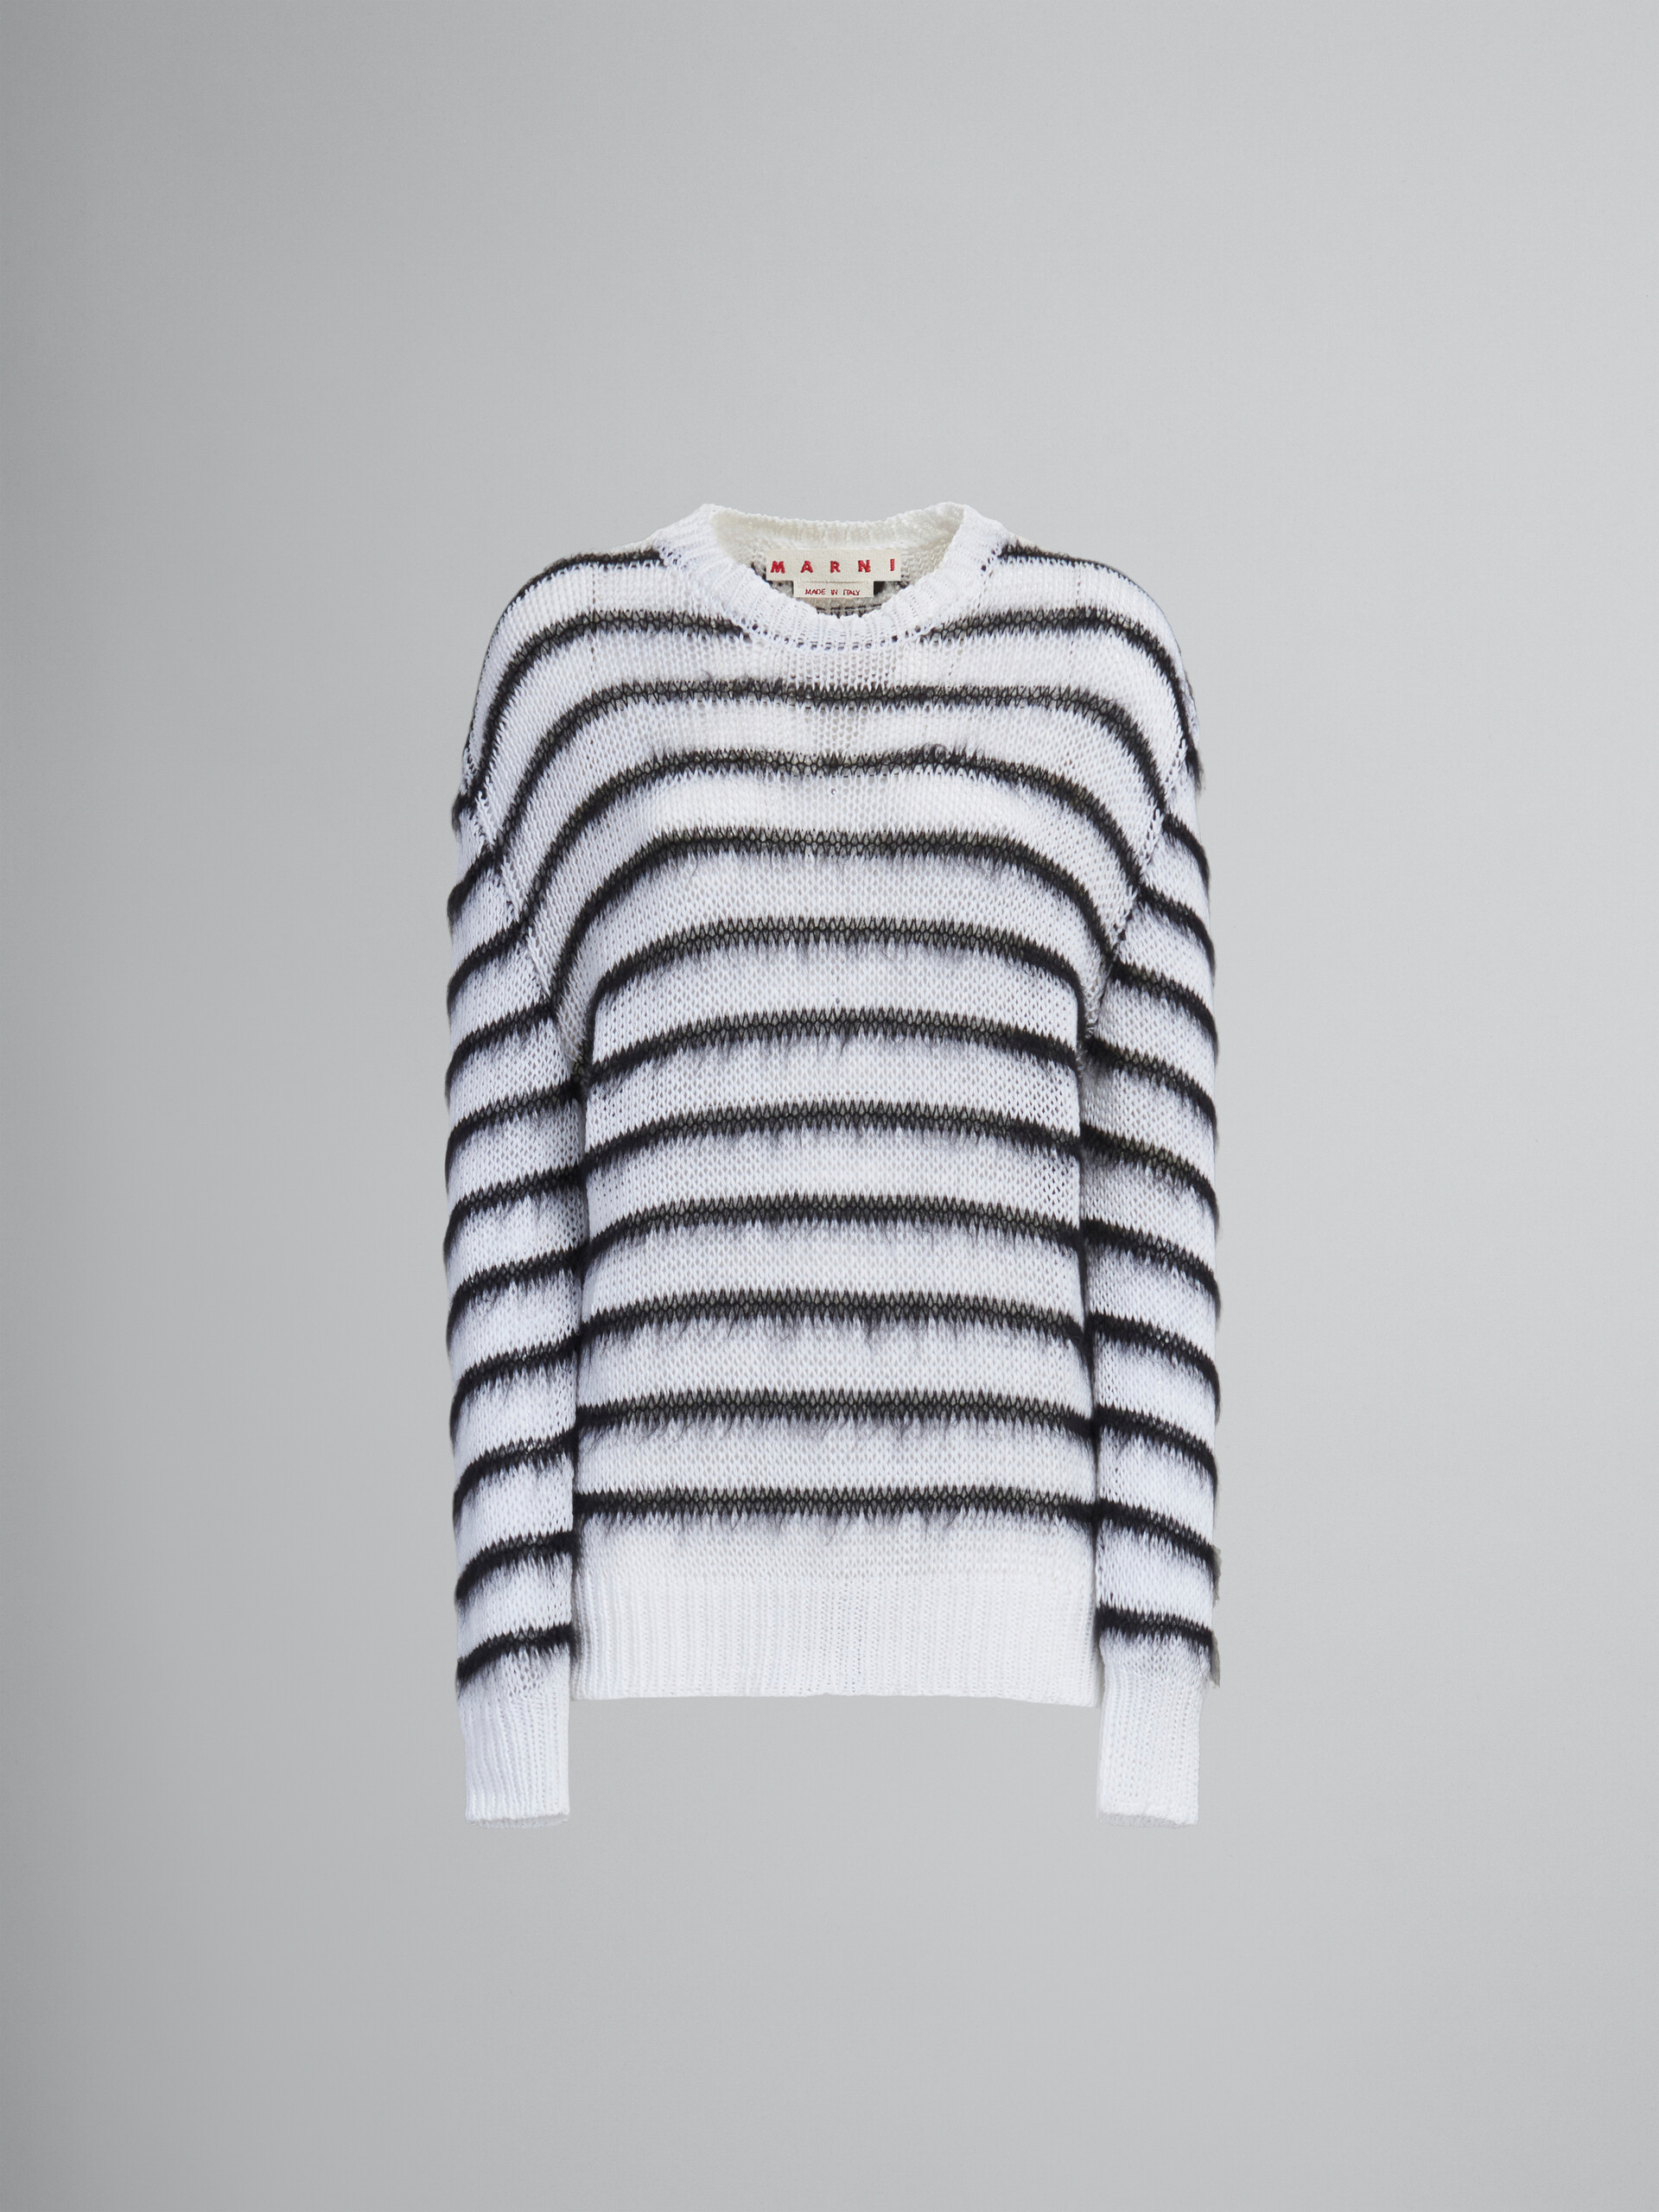 White jumper with black mohair stripes - Pullovers - Image 1